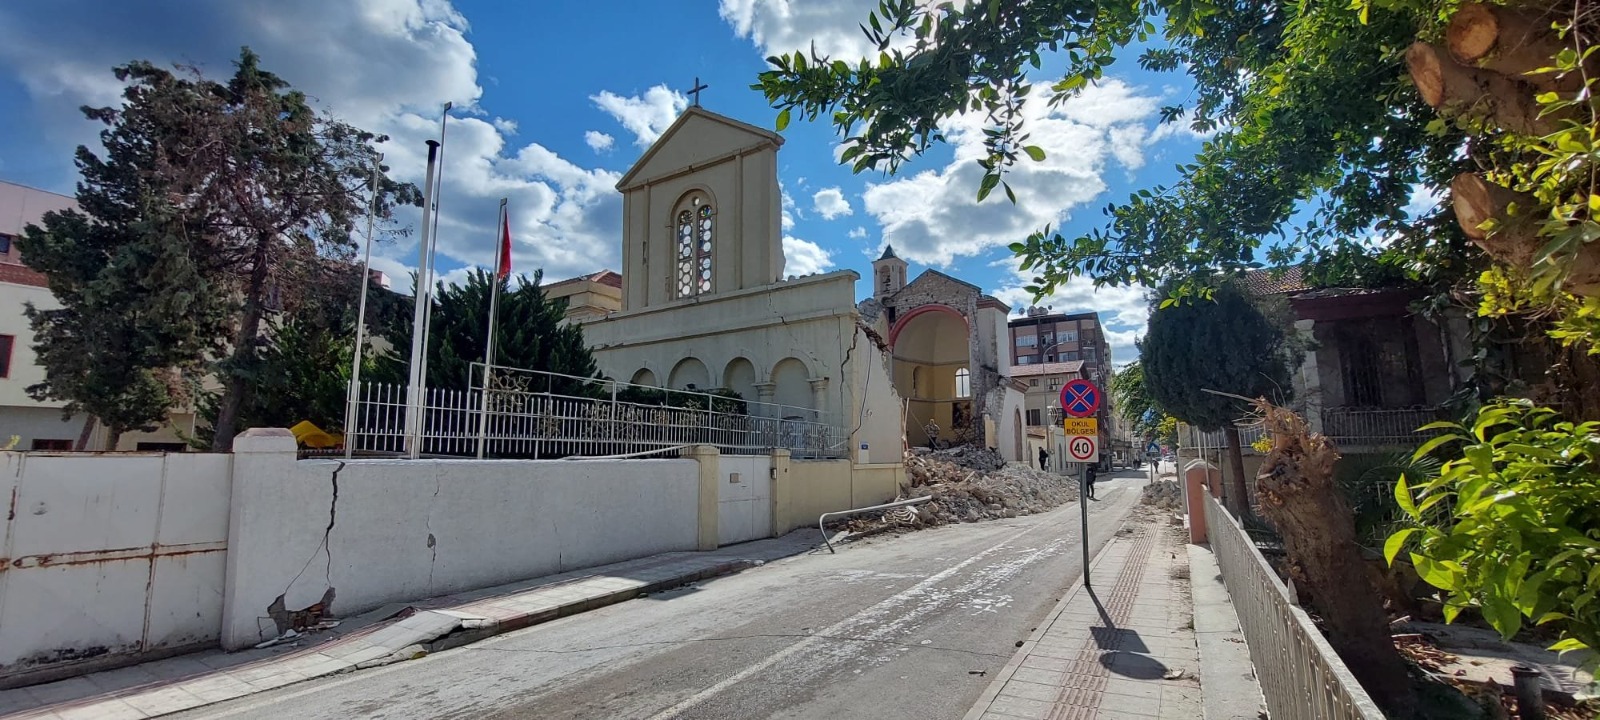 https://www.hindi.awazthevoice.in/upload/news/167672462703_Turkey_The_oldest_church_which_was_the_center_of_the_beginning_of_Christianity_also_collapsed_in_the_earthquake_4.jfif